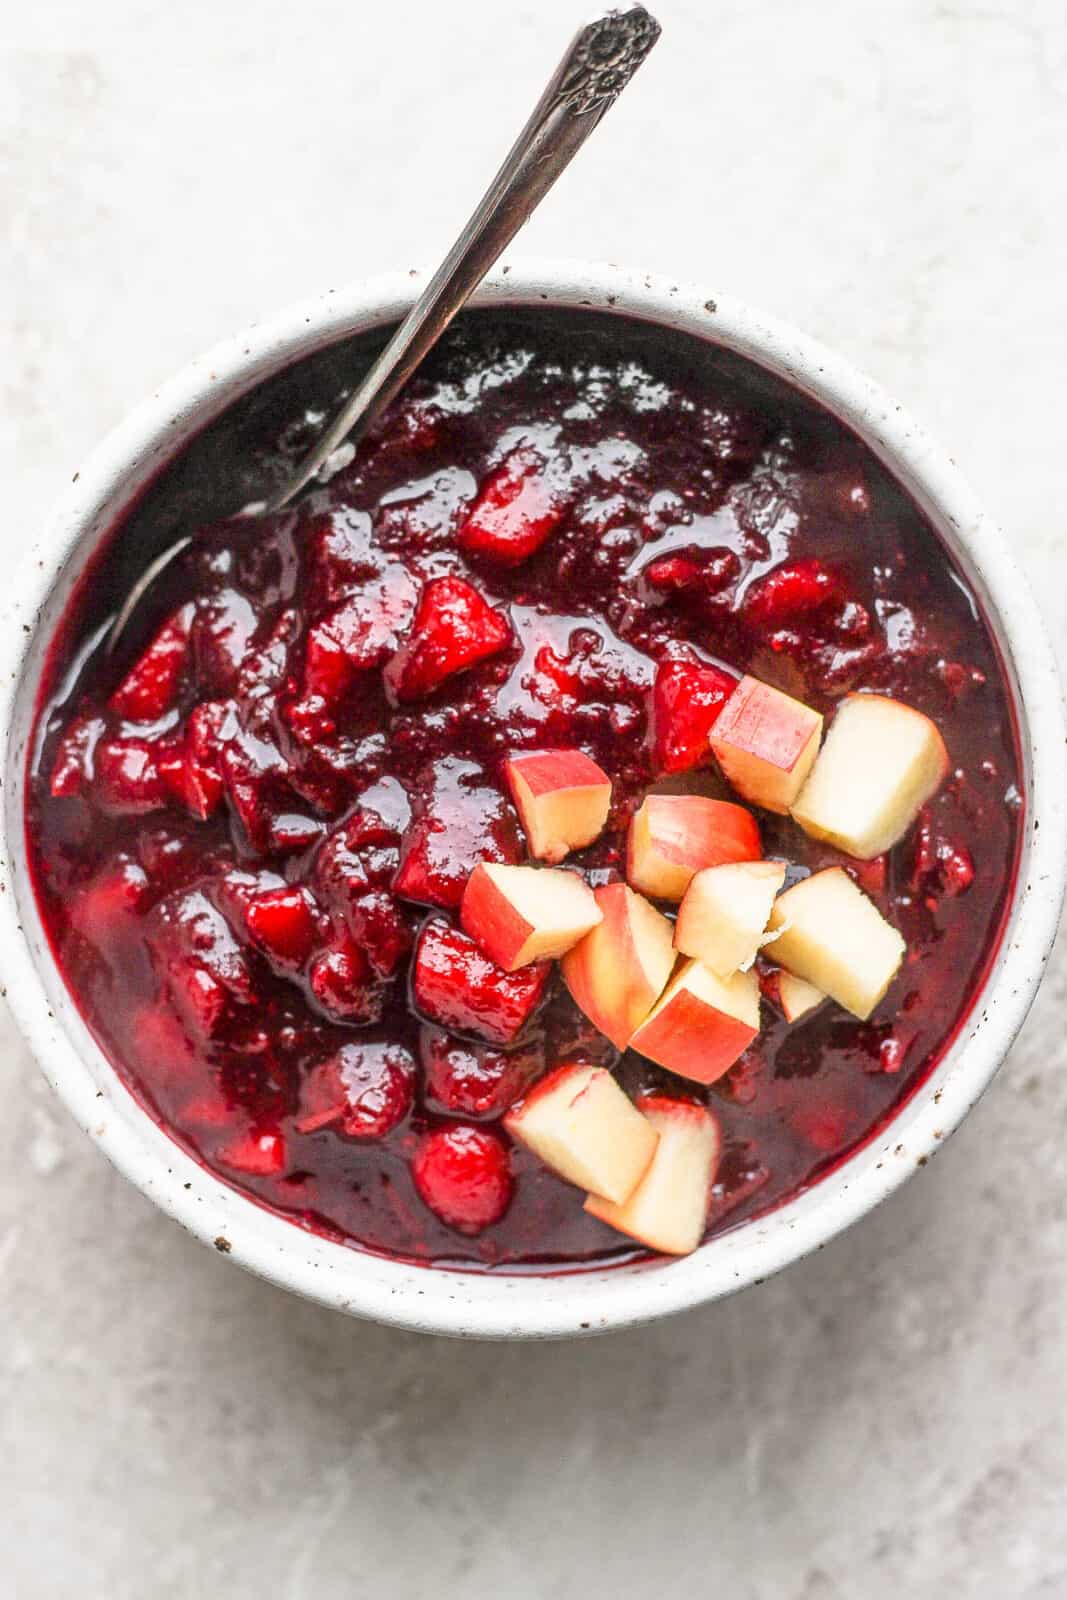 Apple cranberry sauce in a bowl with a spoon.